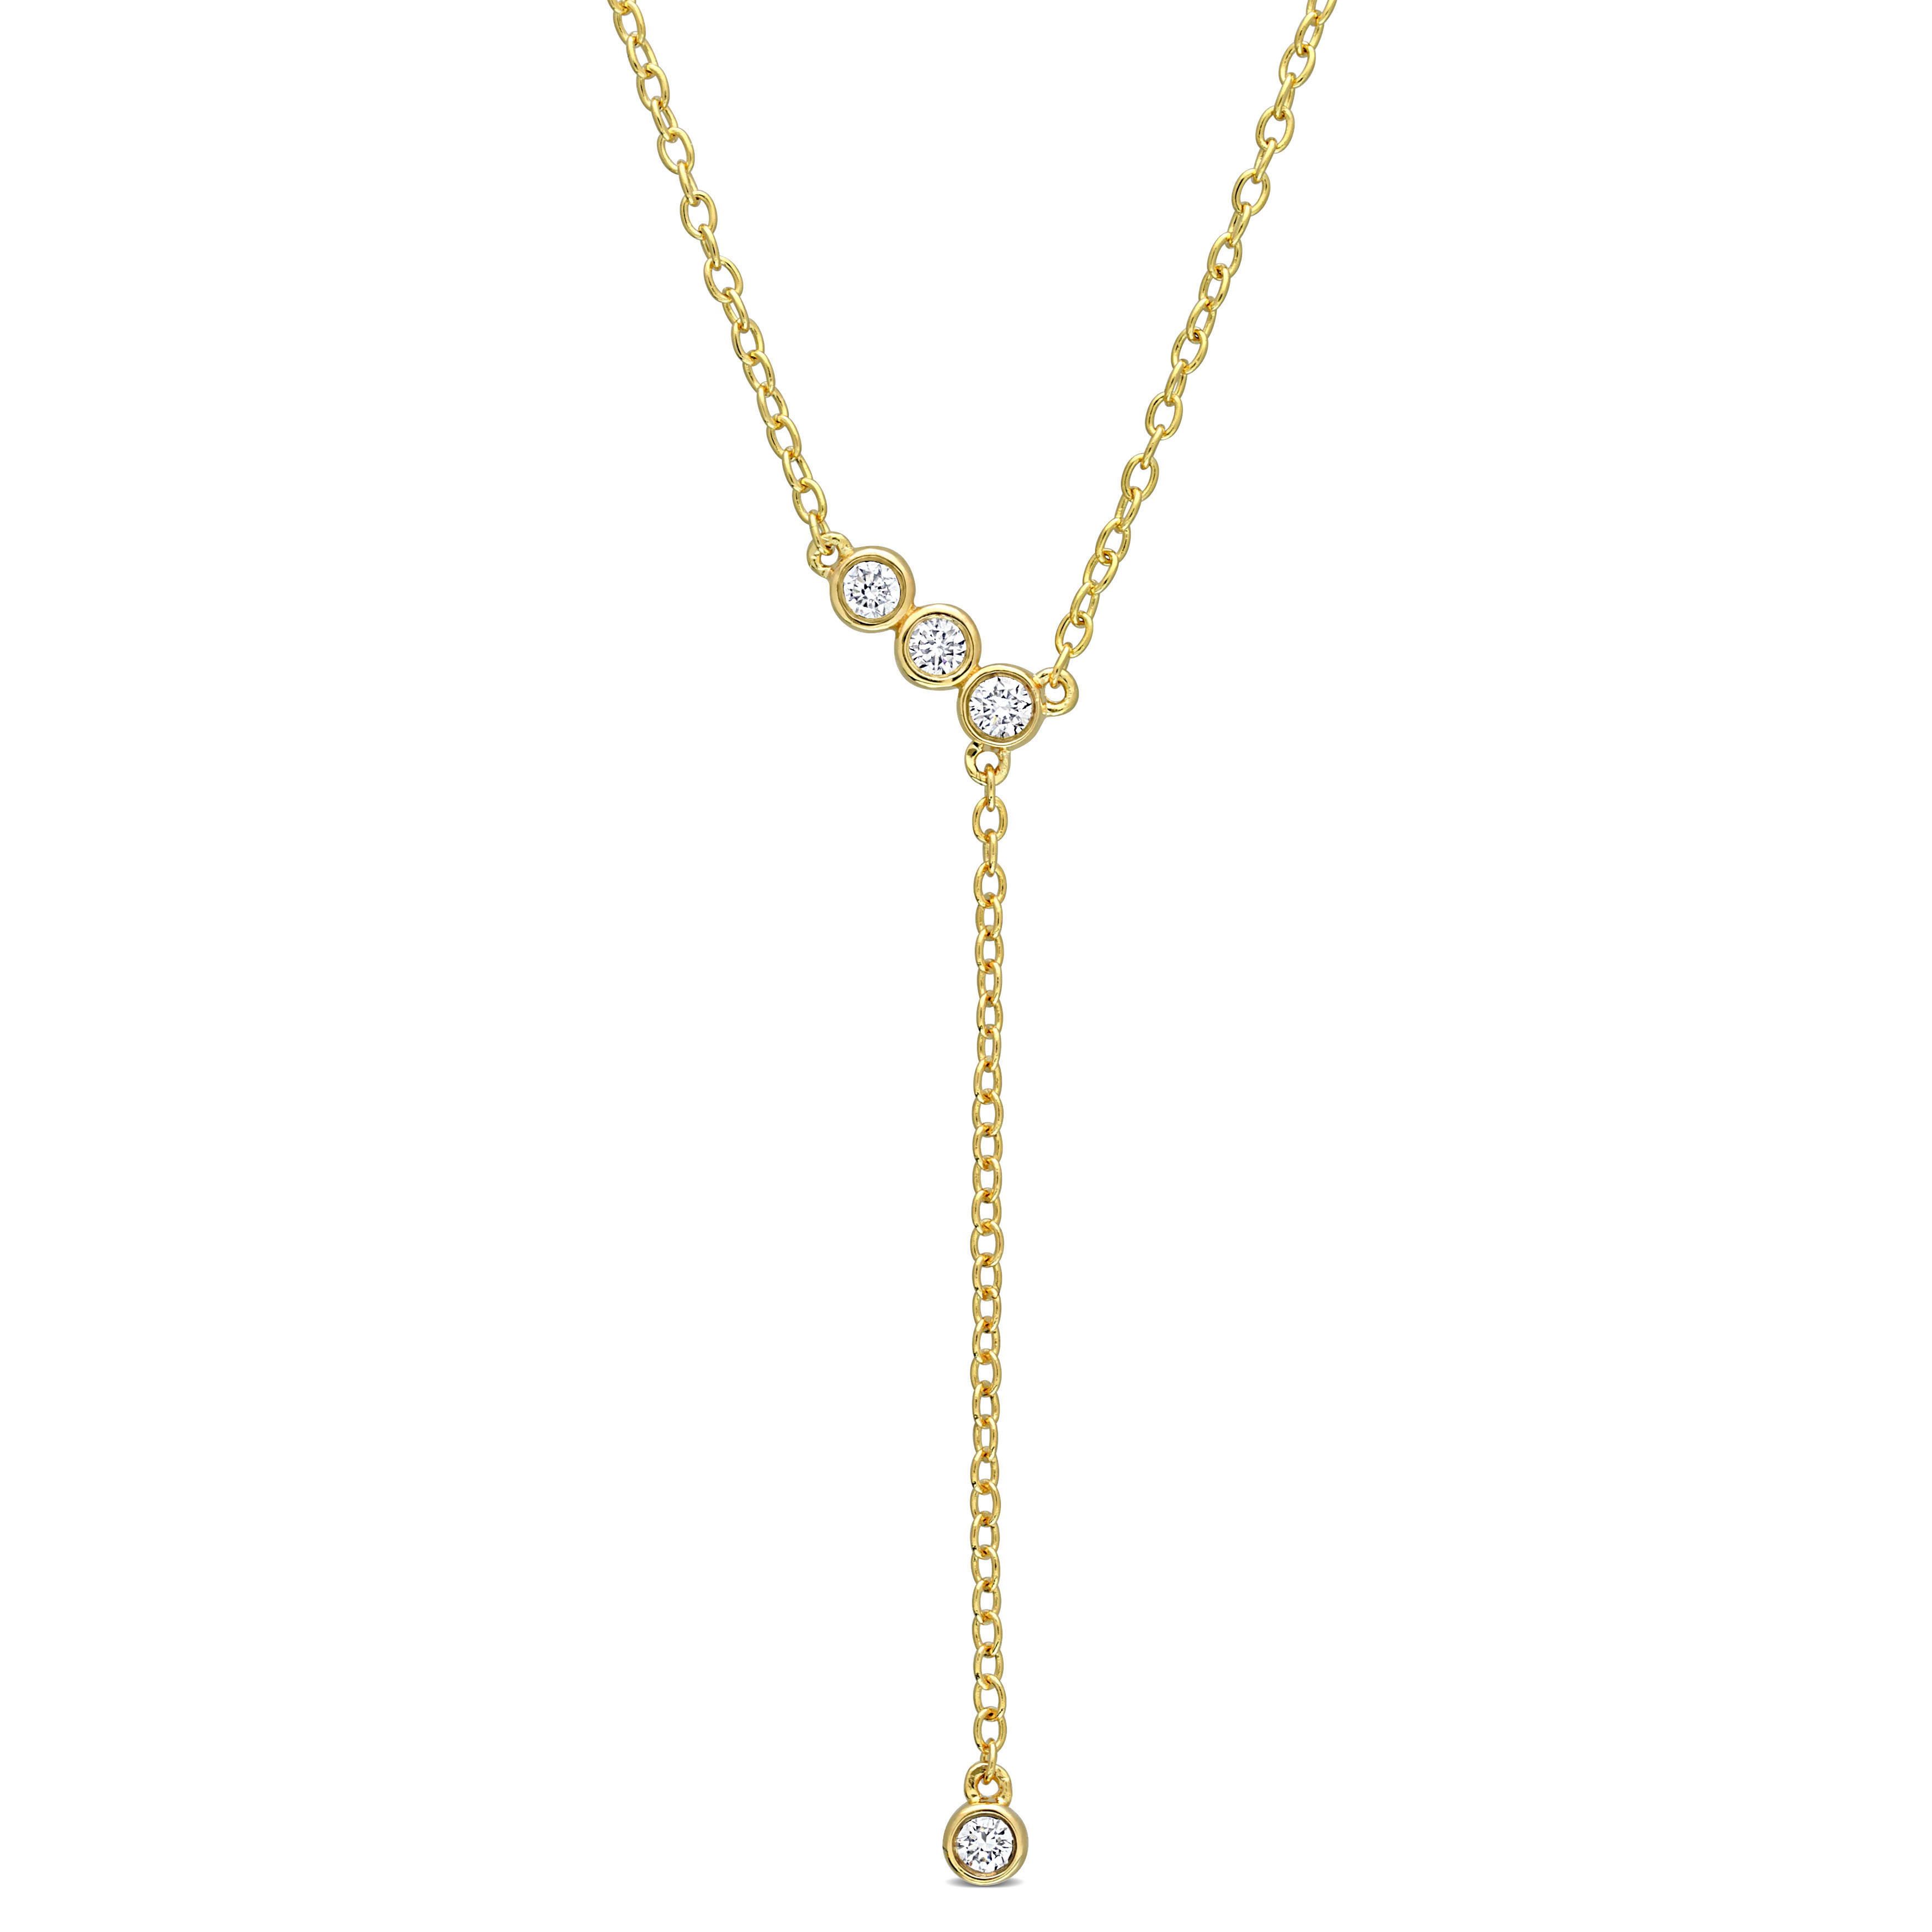 1/8 CT TGW Lab Created Diamond Lariat Necklace in 18k Yellow Gold Plated Sterling Silver - 17 in.